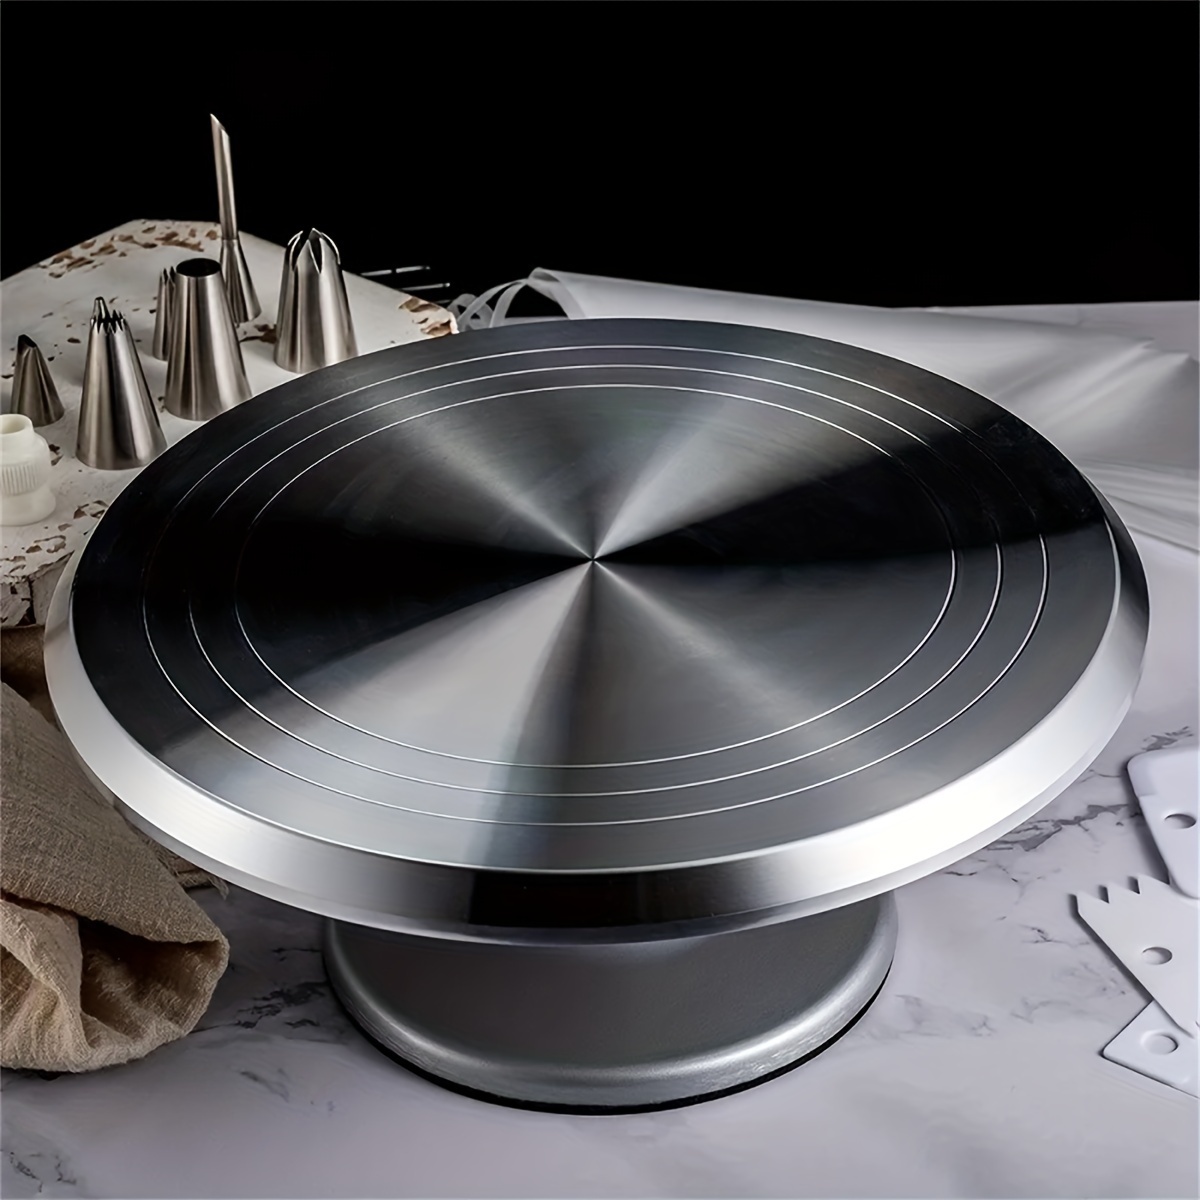 1pc, Aluminum Alloy Cake Turntable, 10 Inch, Non-Slip Rotating Dessert  Display Stand, For Cake Decorating Tools, Baking Tools, Kitchen Gadgets,  Kitche